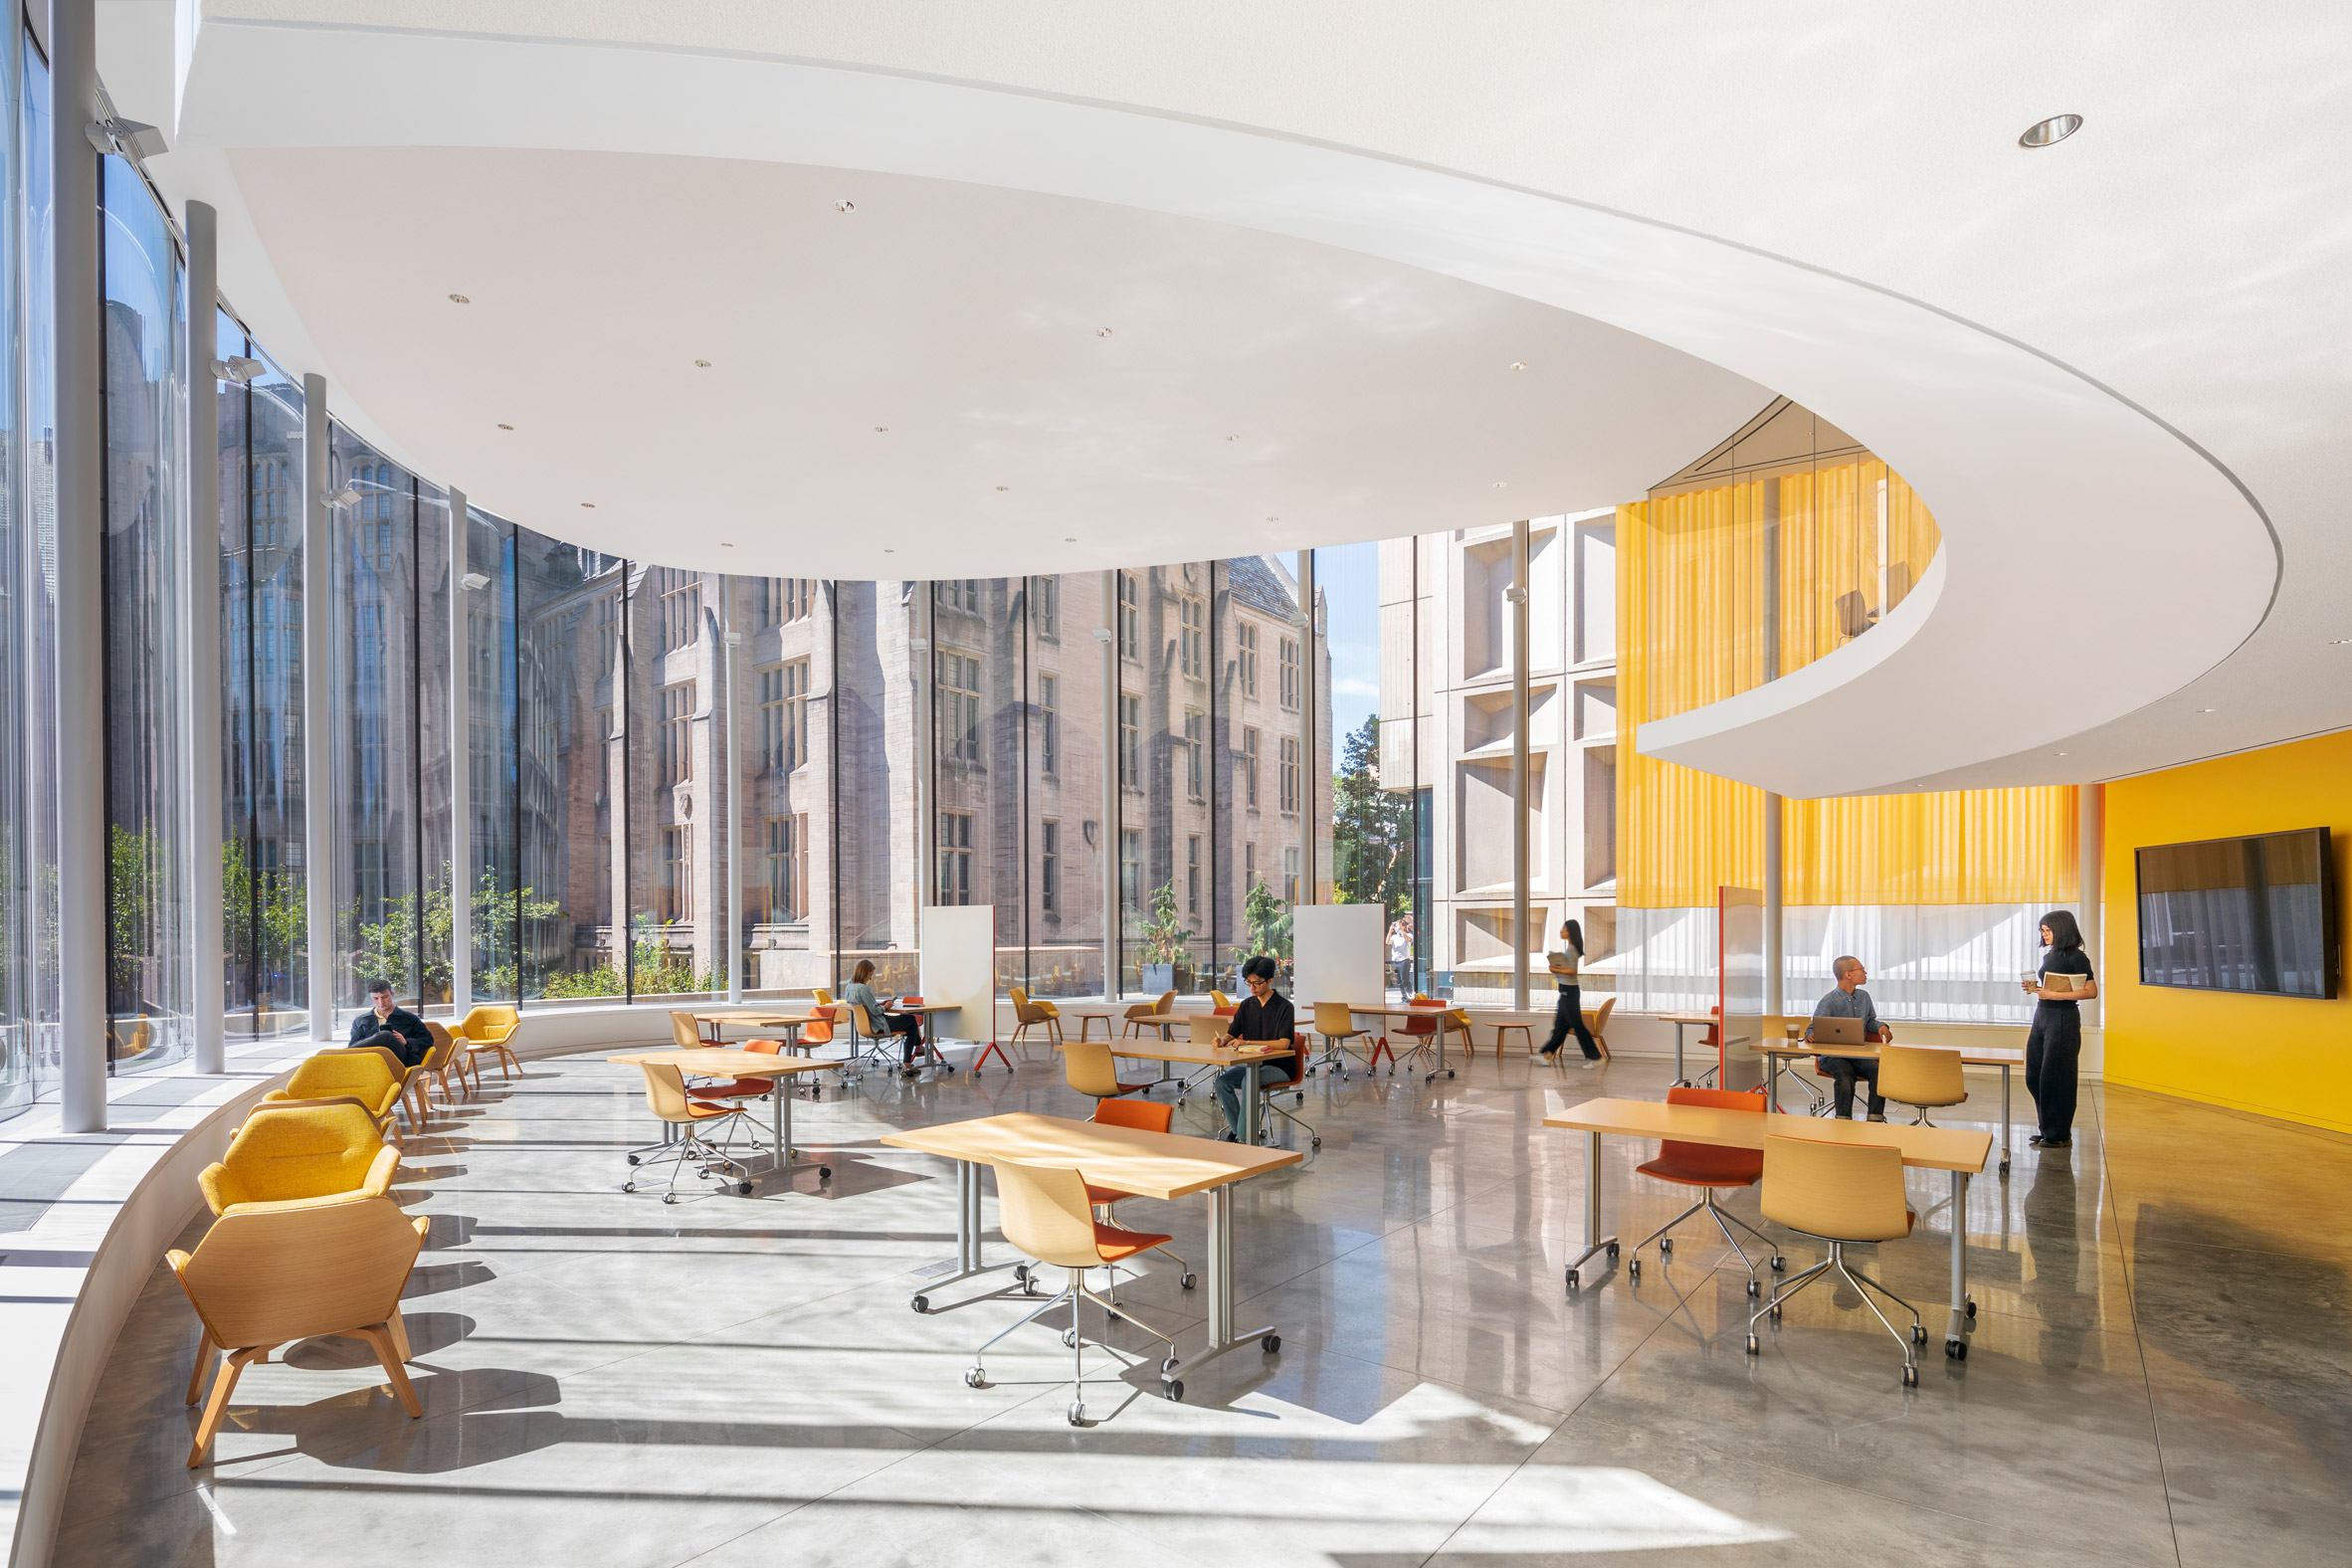 Interiors of student centre by Weiss/Manfredi 